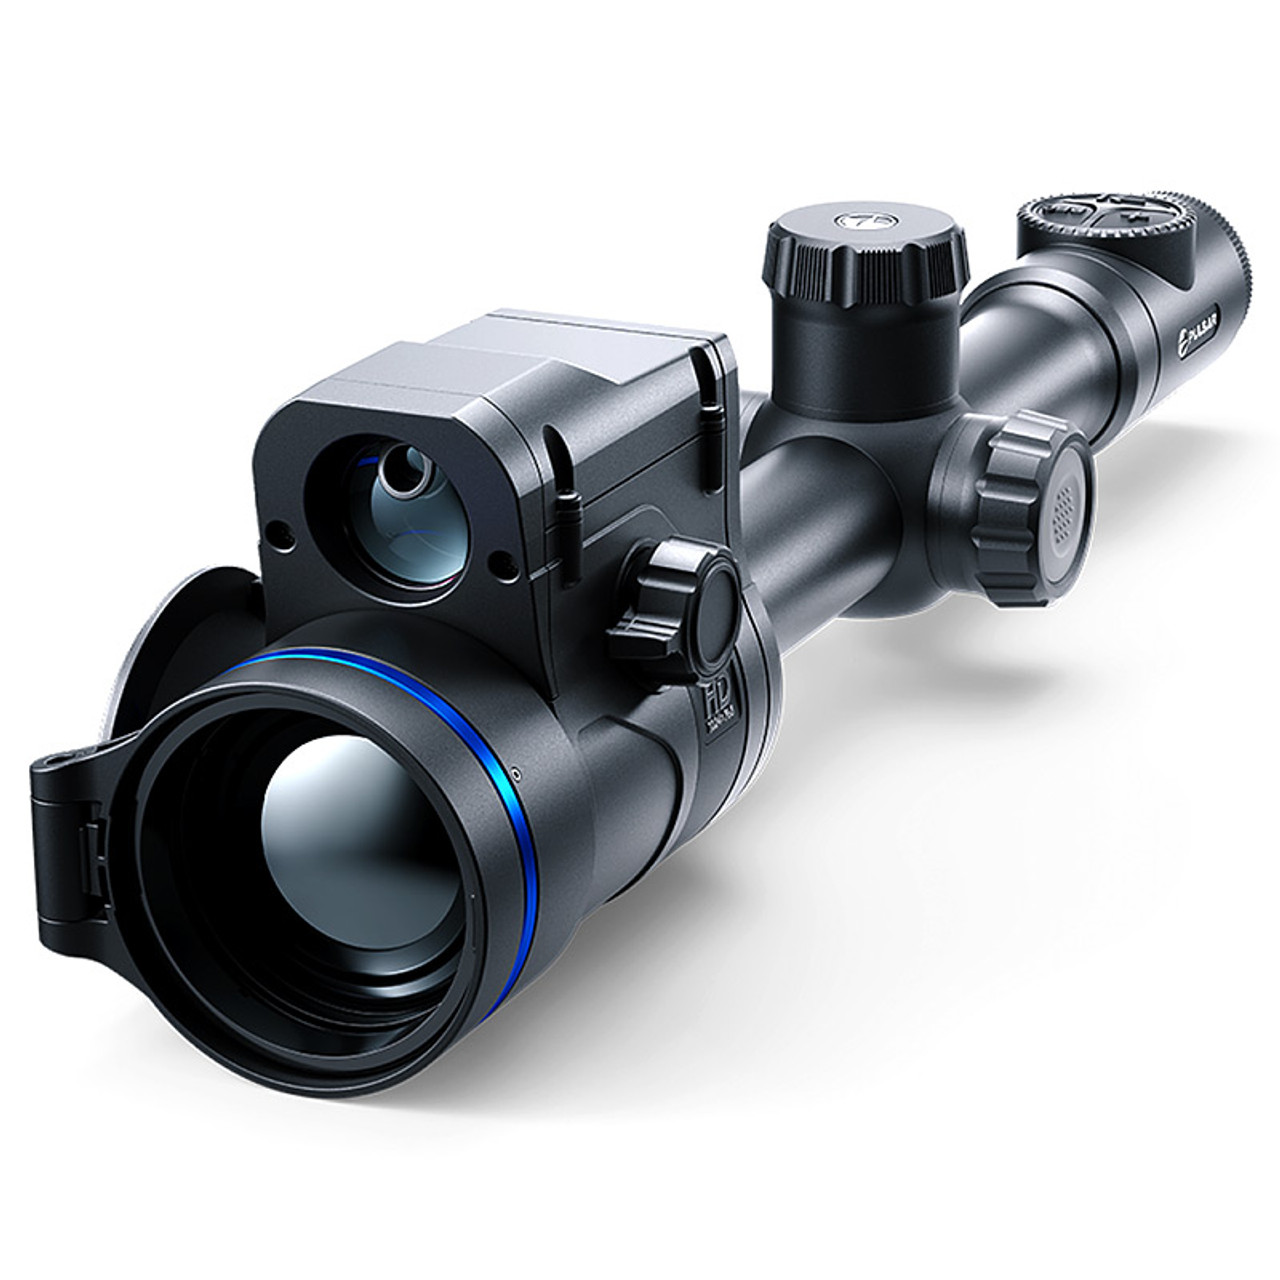 Thermion 2 LRF XL50 Thermal Imaging Riflescope by Pulsar